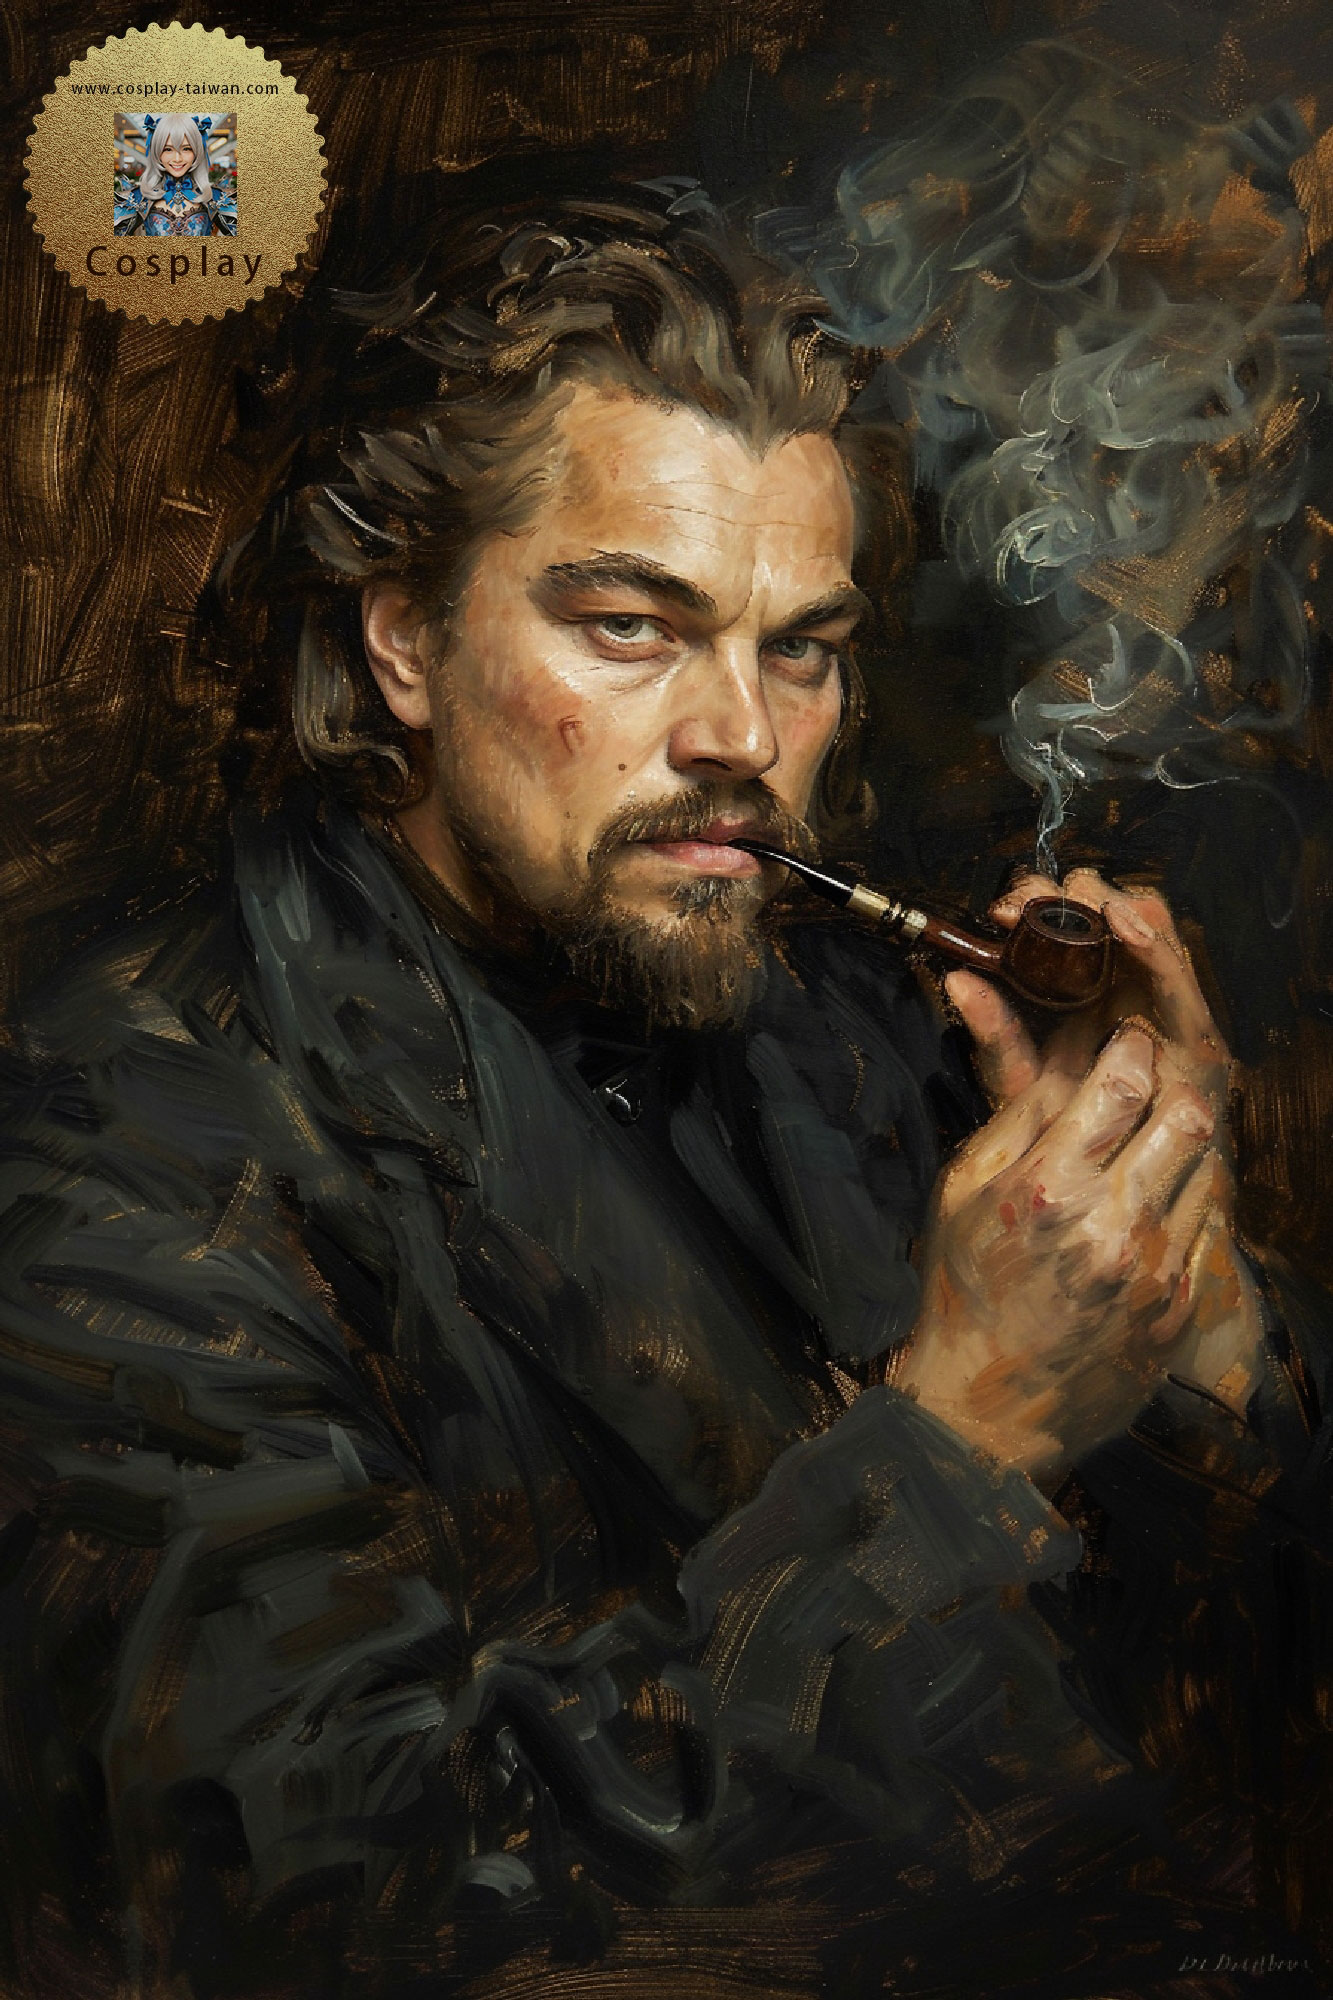 leonchou1968_Paint_an_oil_painting_of_Leonardo_DiCaprio_smoking_04c56190-4704-45e4-be7a-ee694d522af7.jpg